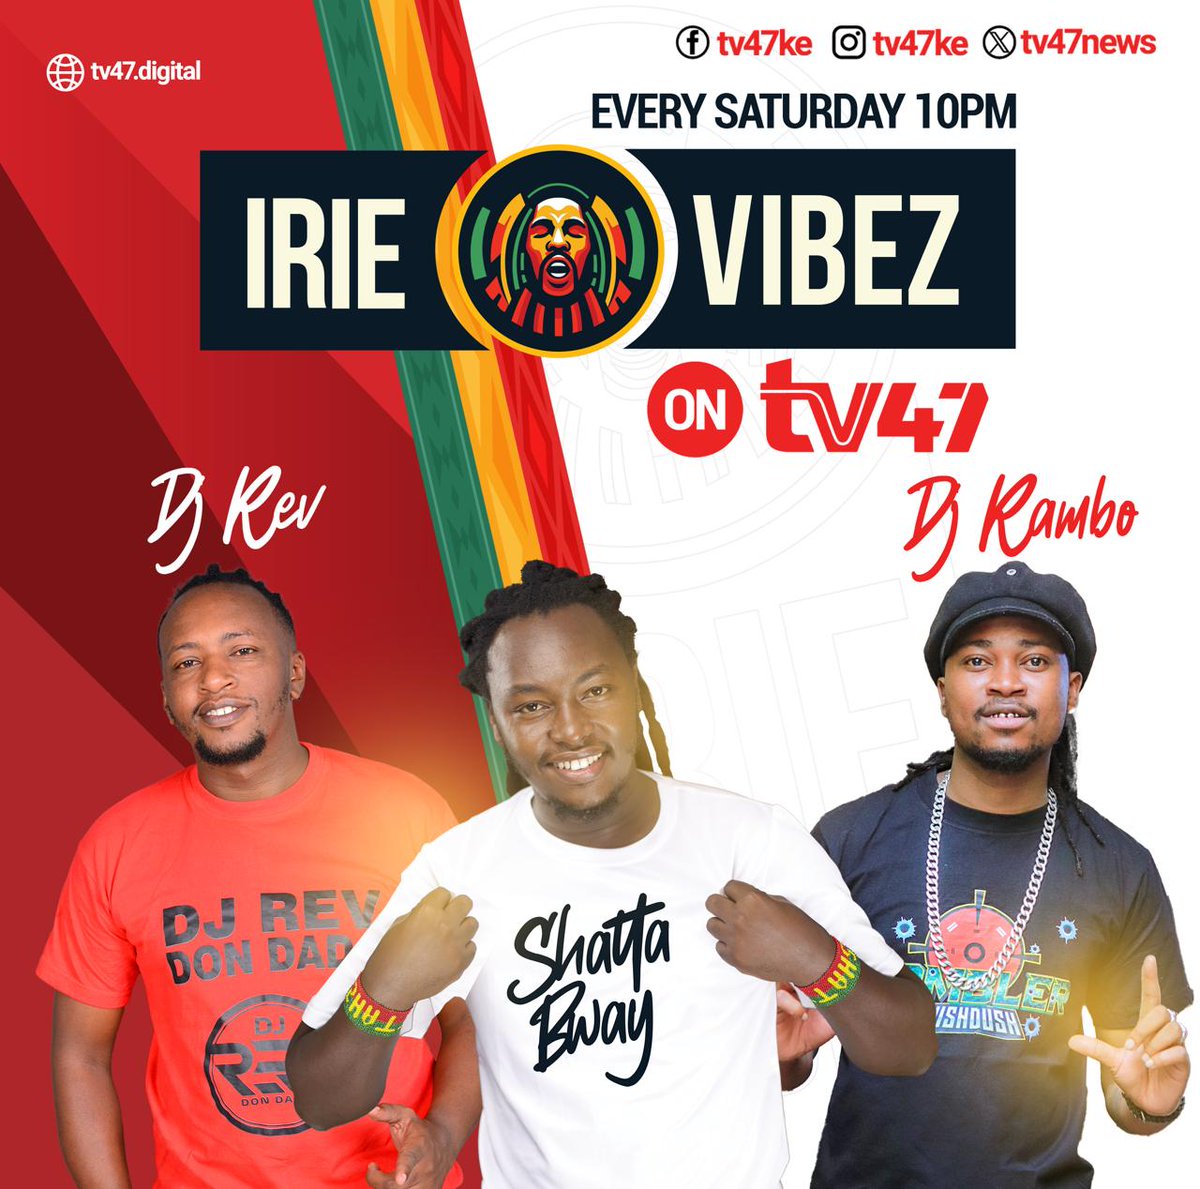 Don't miss out on the debut of Irie Vibes tonight on TV47. Hosted by Shatta Buay, this show promises to bring the best of reggae music to your living room every Saturday at 10pm.#IrieVibezTV47 .